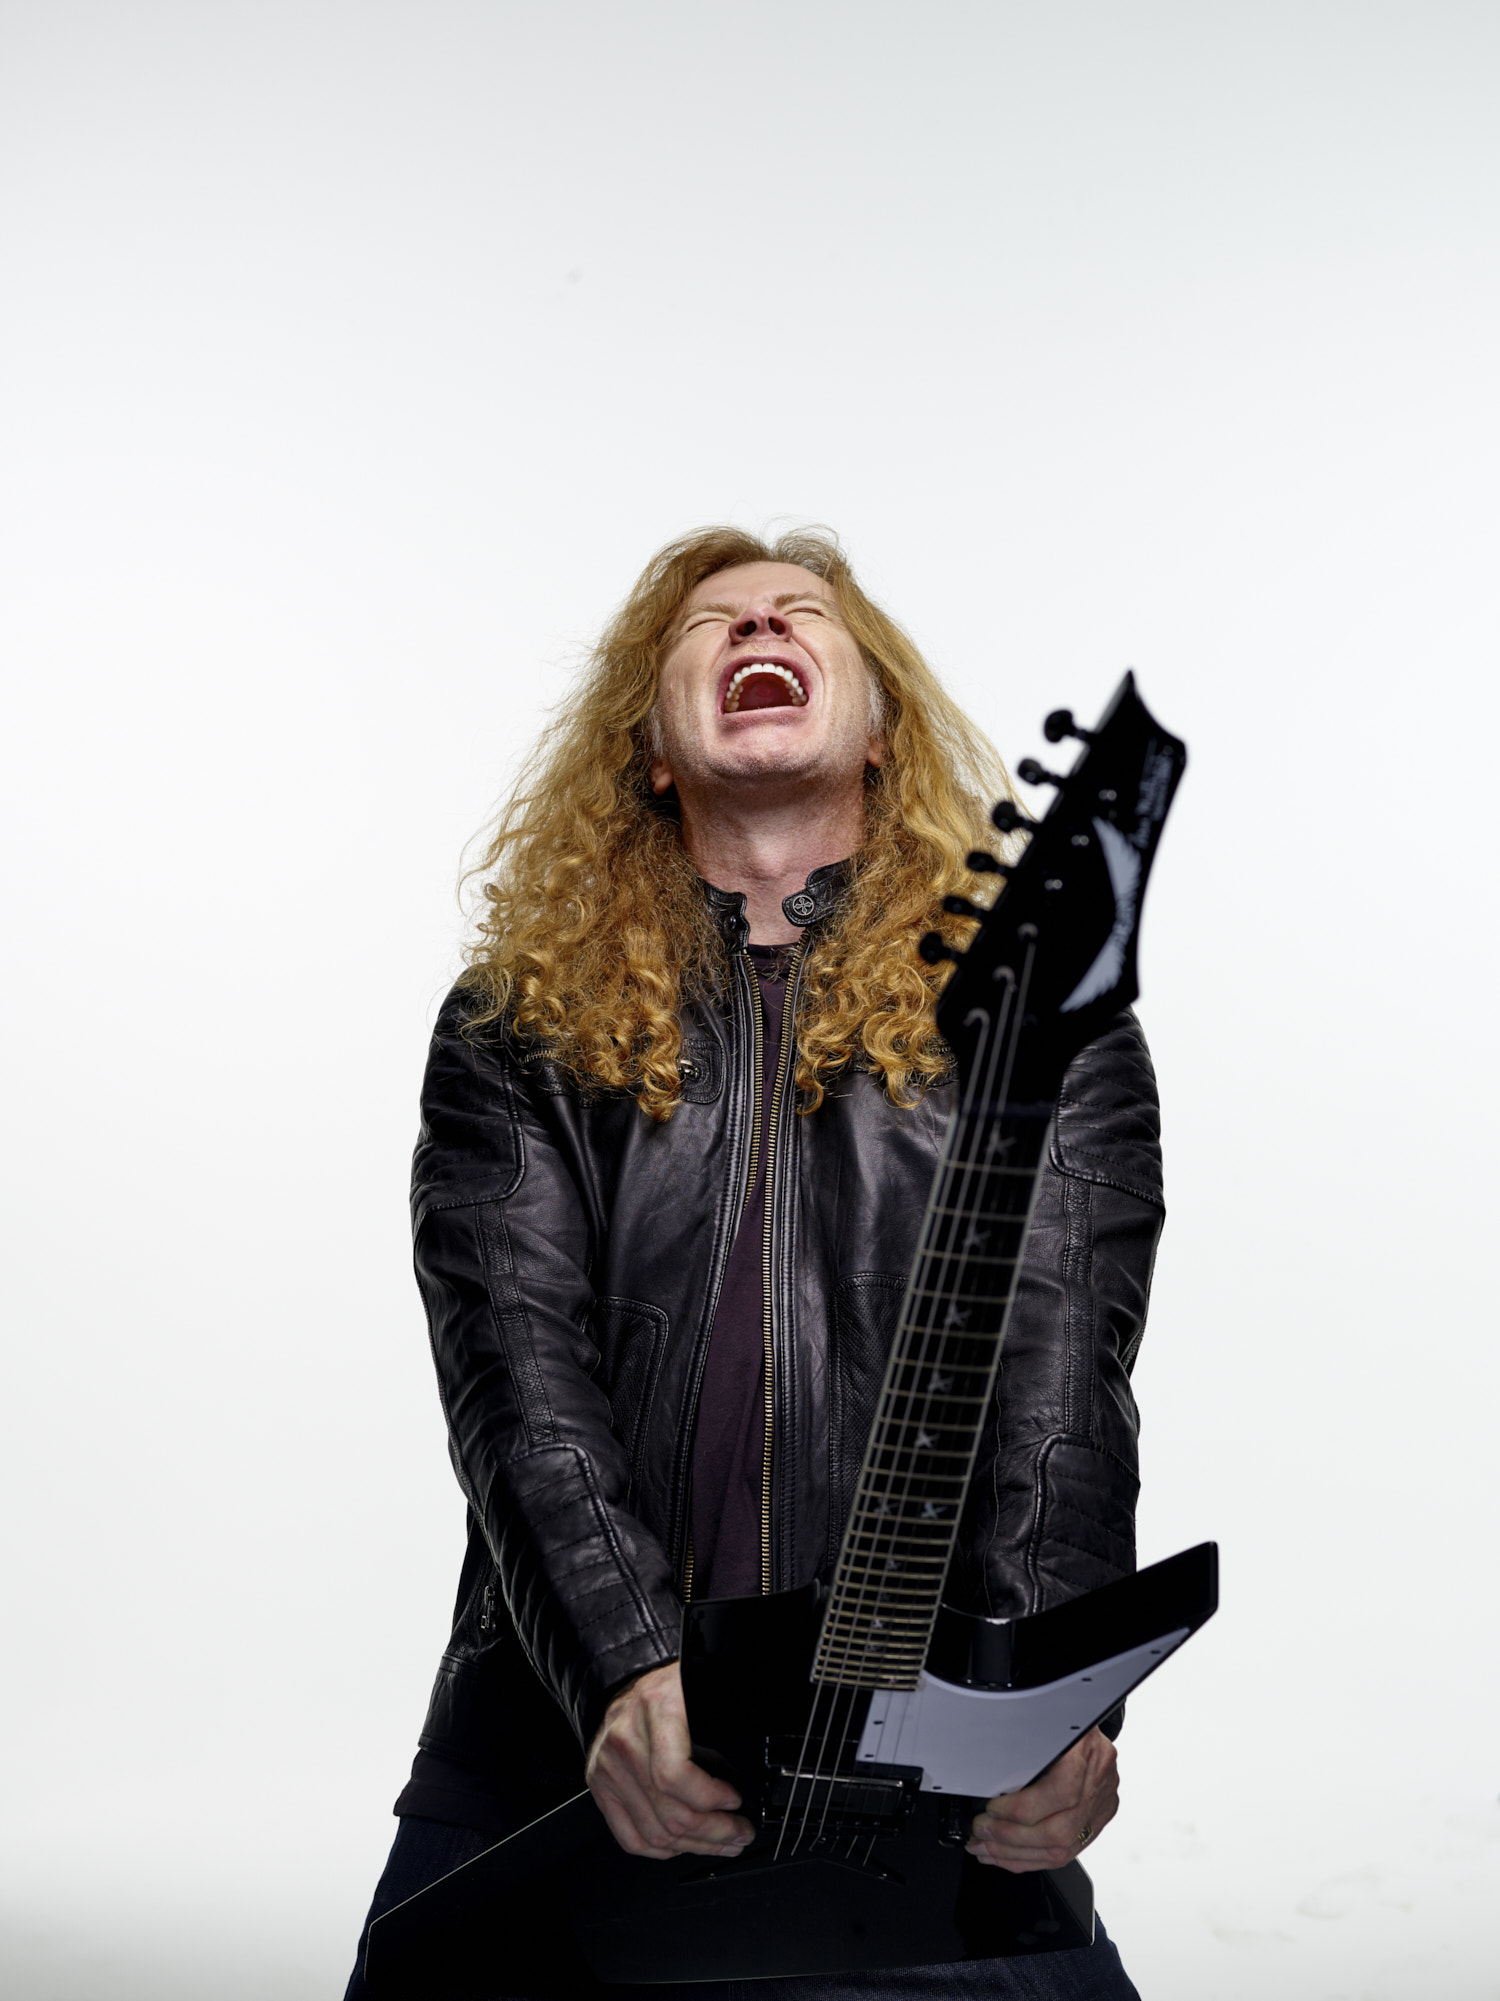 Phase One IQ250 sample photo. Dave mustaine photography